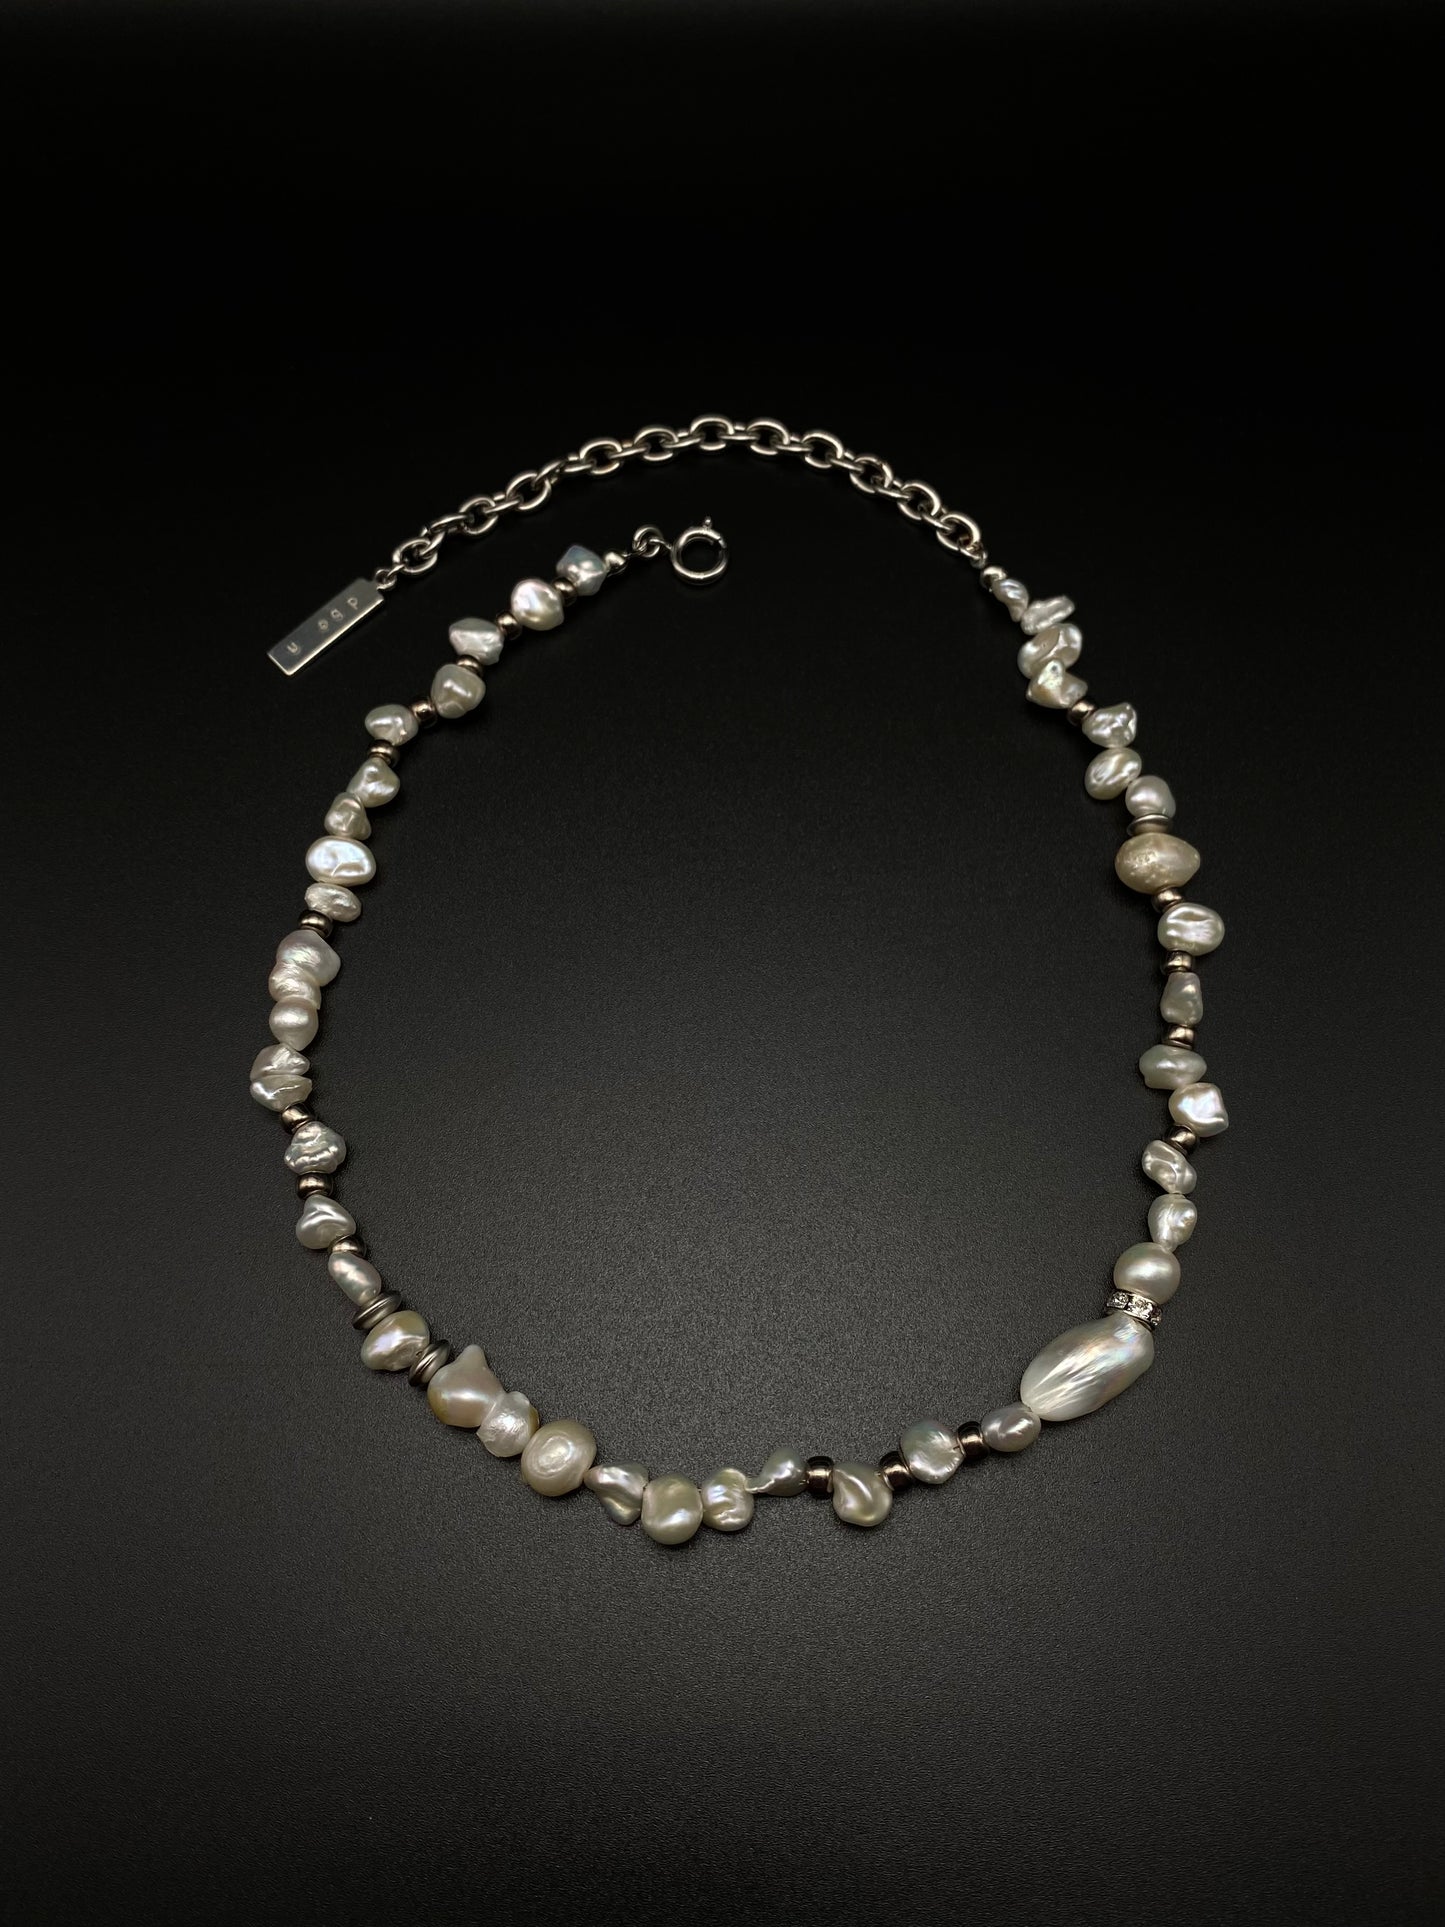 1010 necklace - Pearl